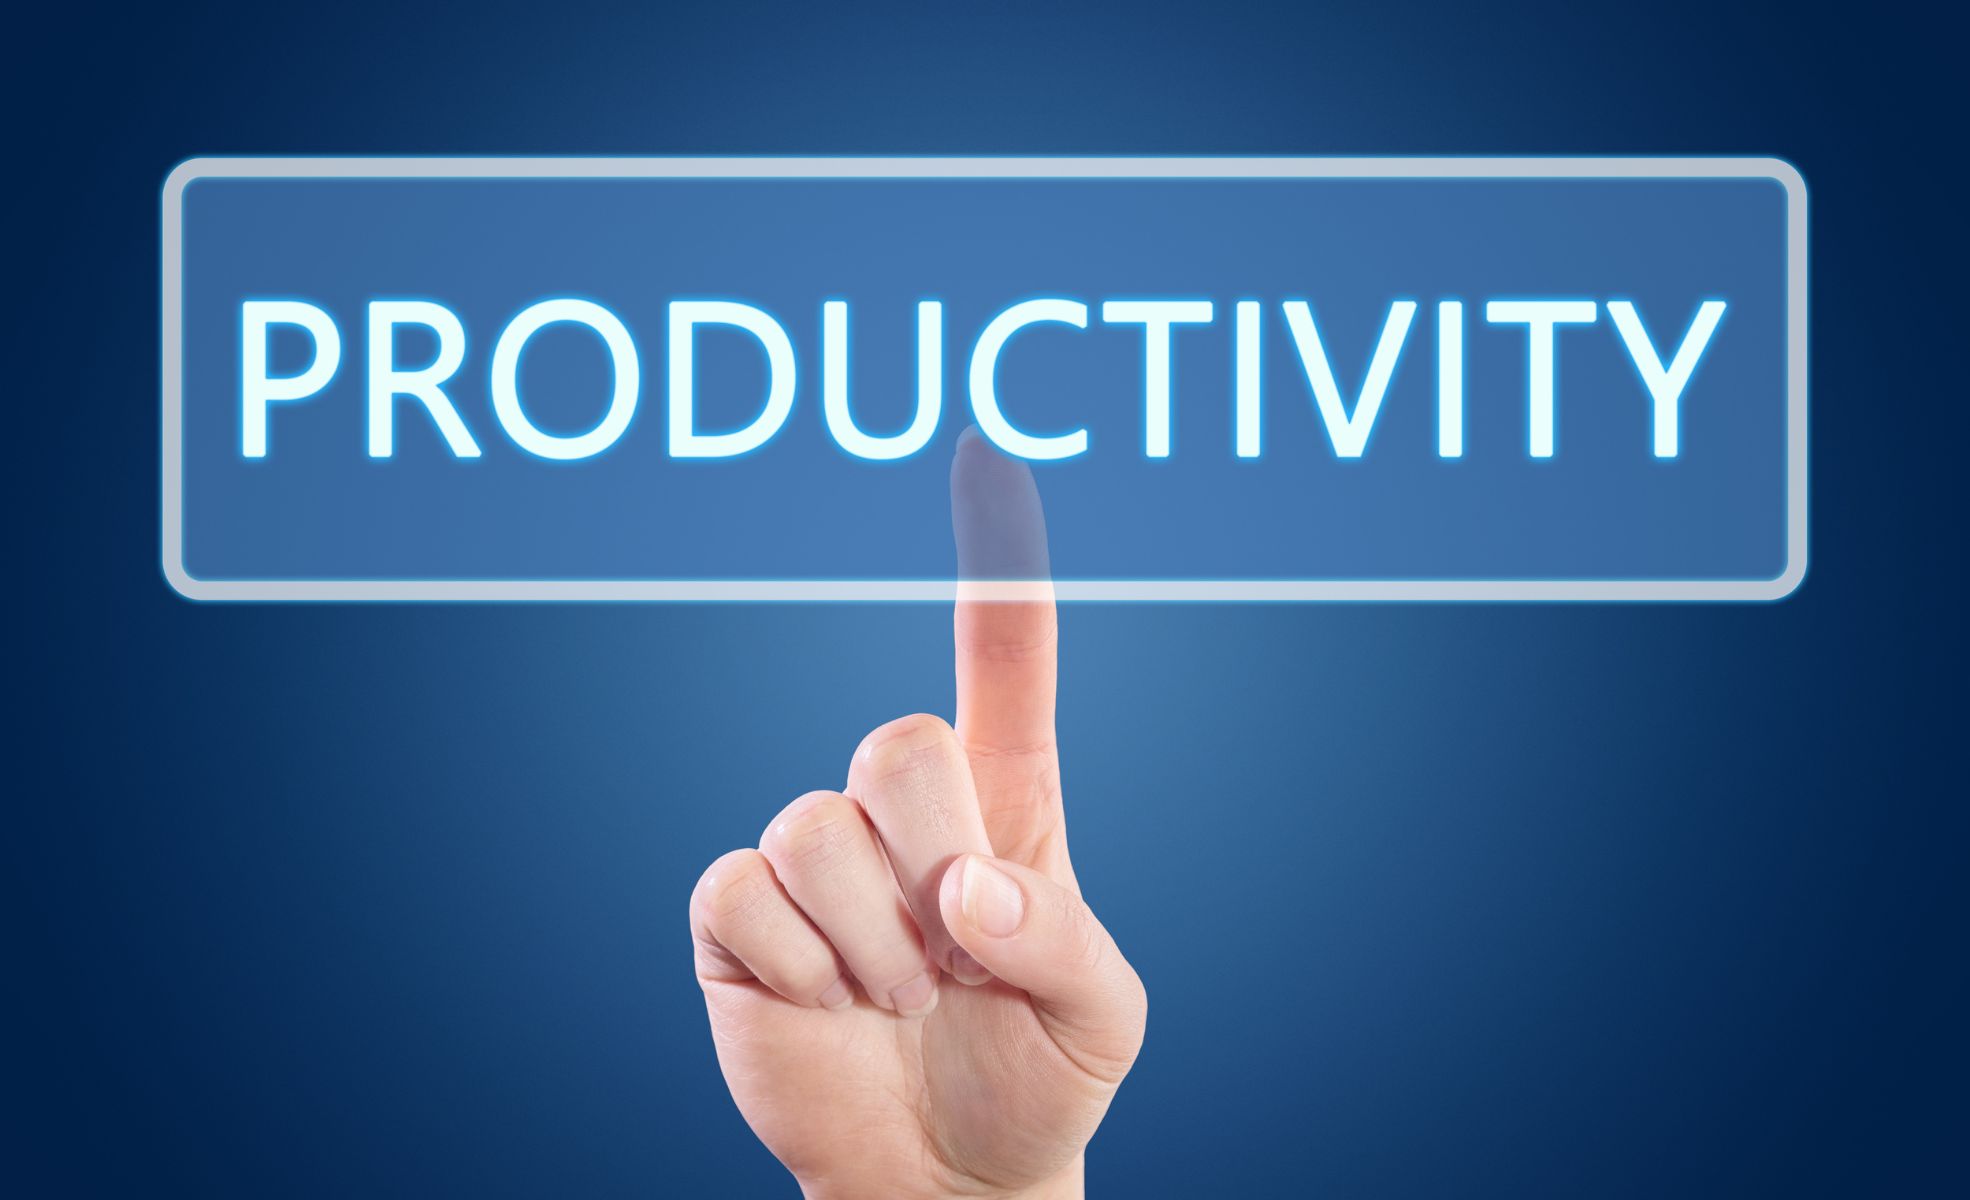 Finger Pointing To Word "Productivity"